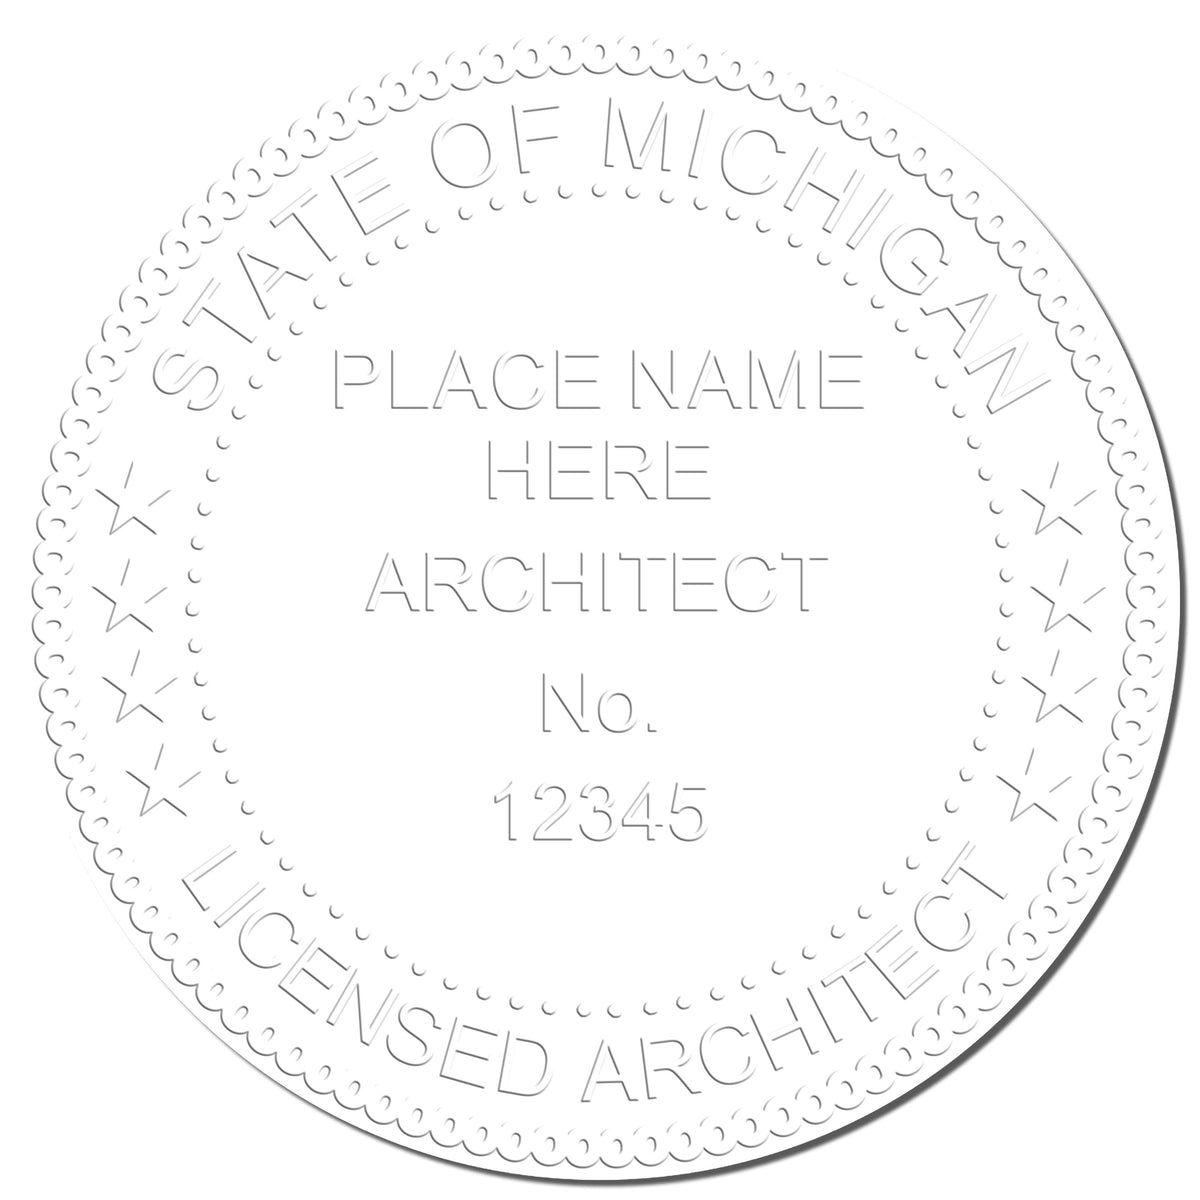 This paper is stamped with a sample imprint of the Gift Michigan Architect Seal, signifying its quality and reliability.